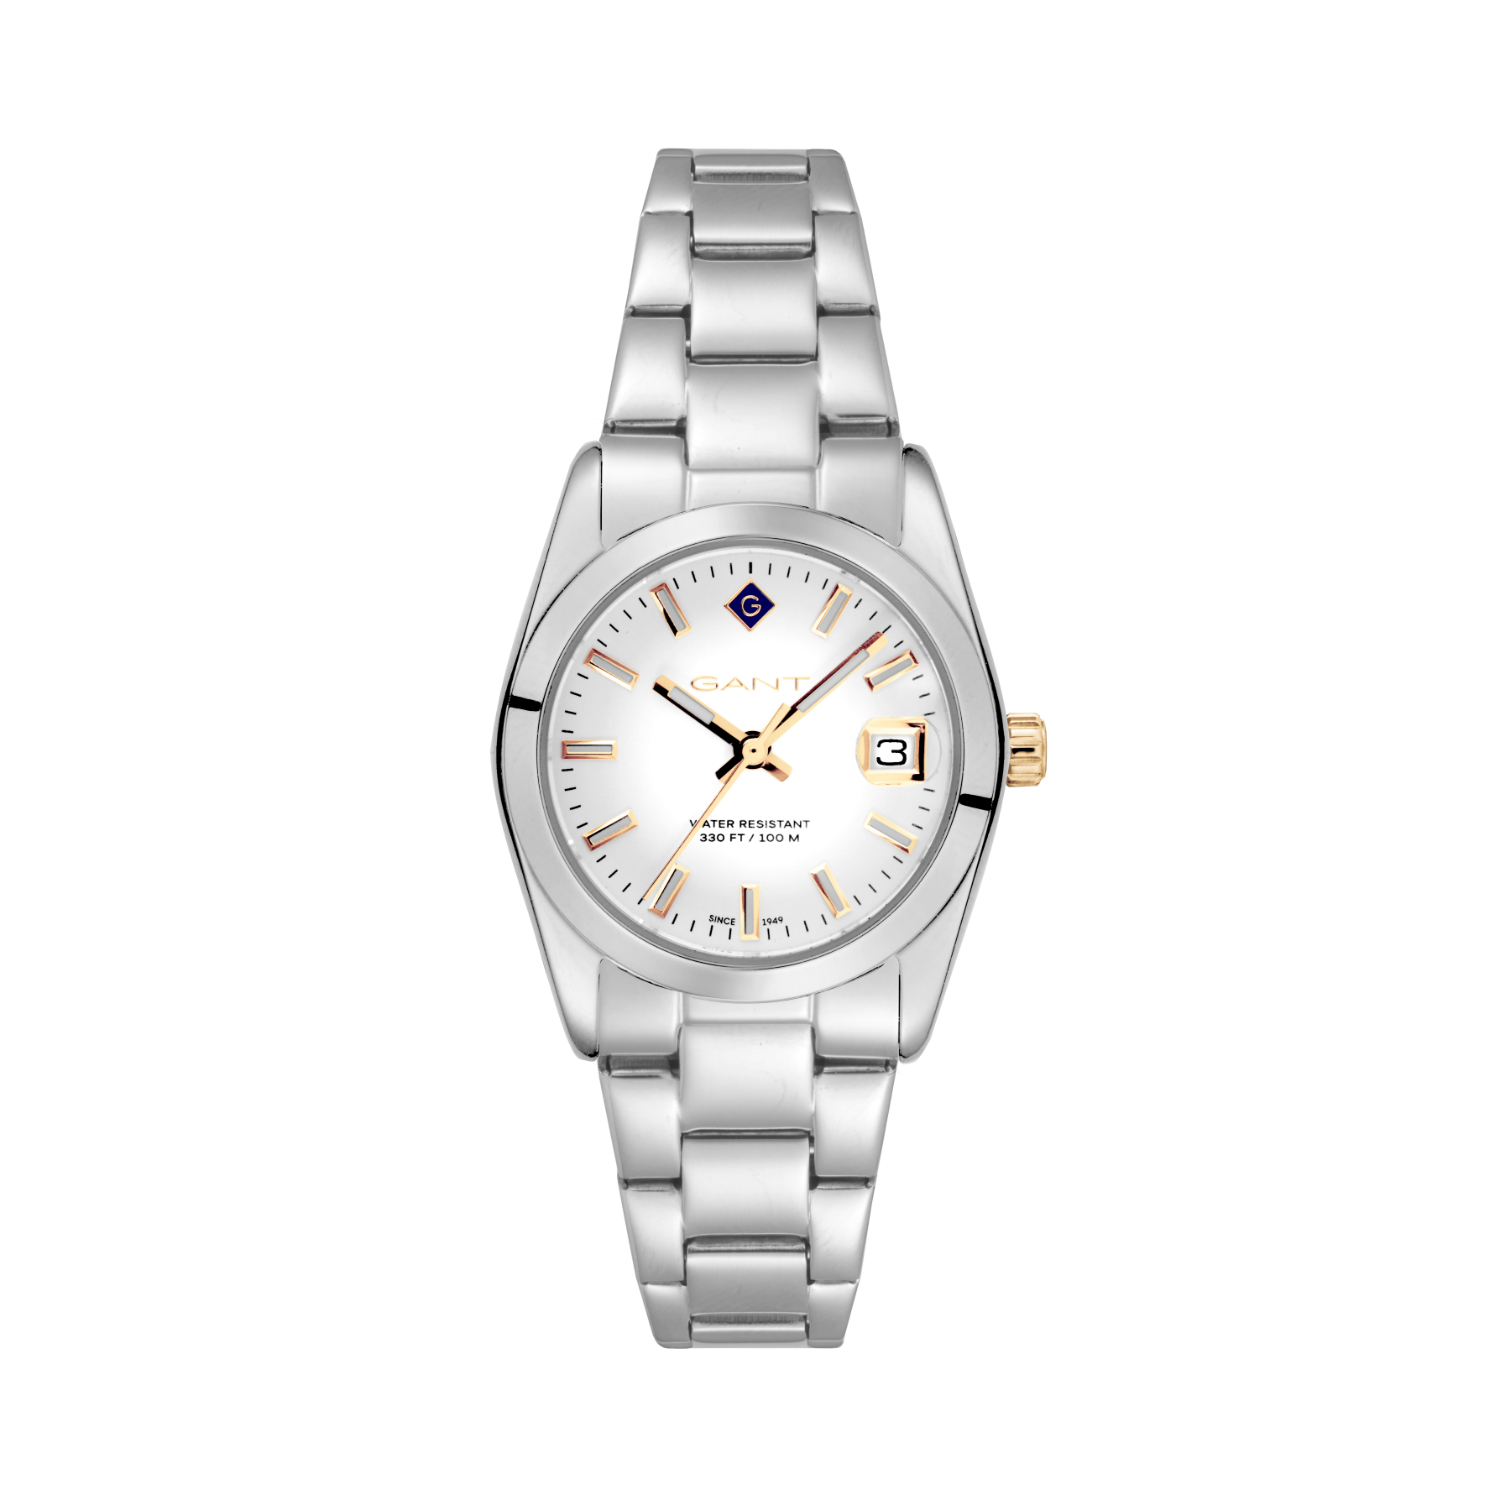 GANT womens watch in silver stainless steel with white dial and bracelet.